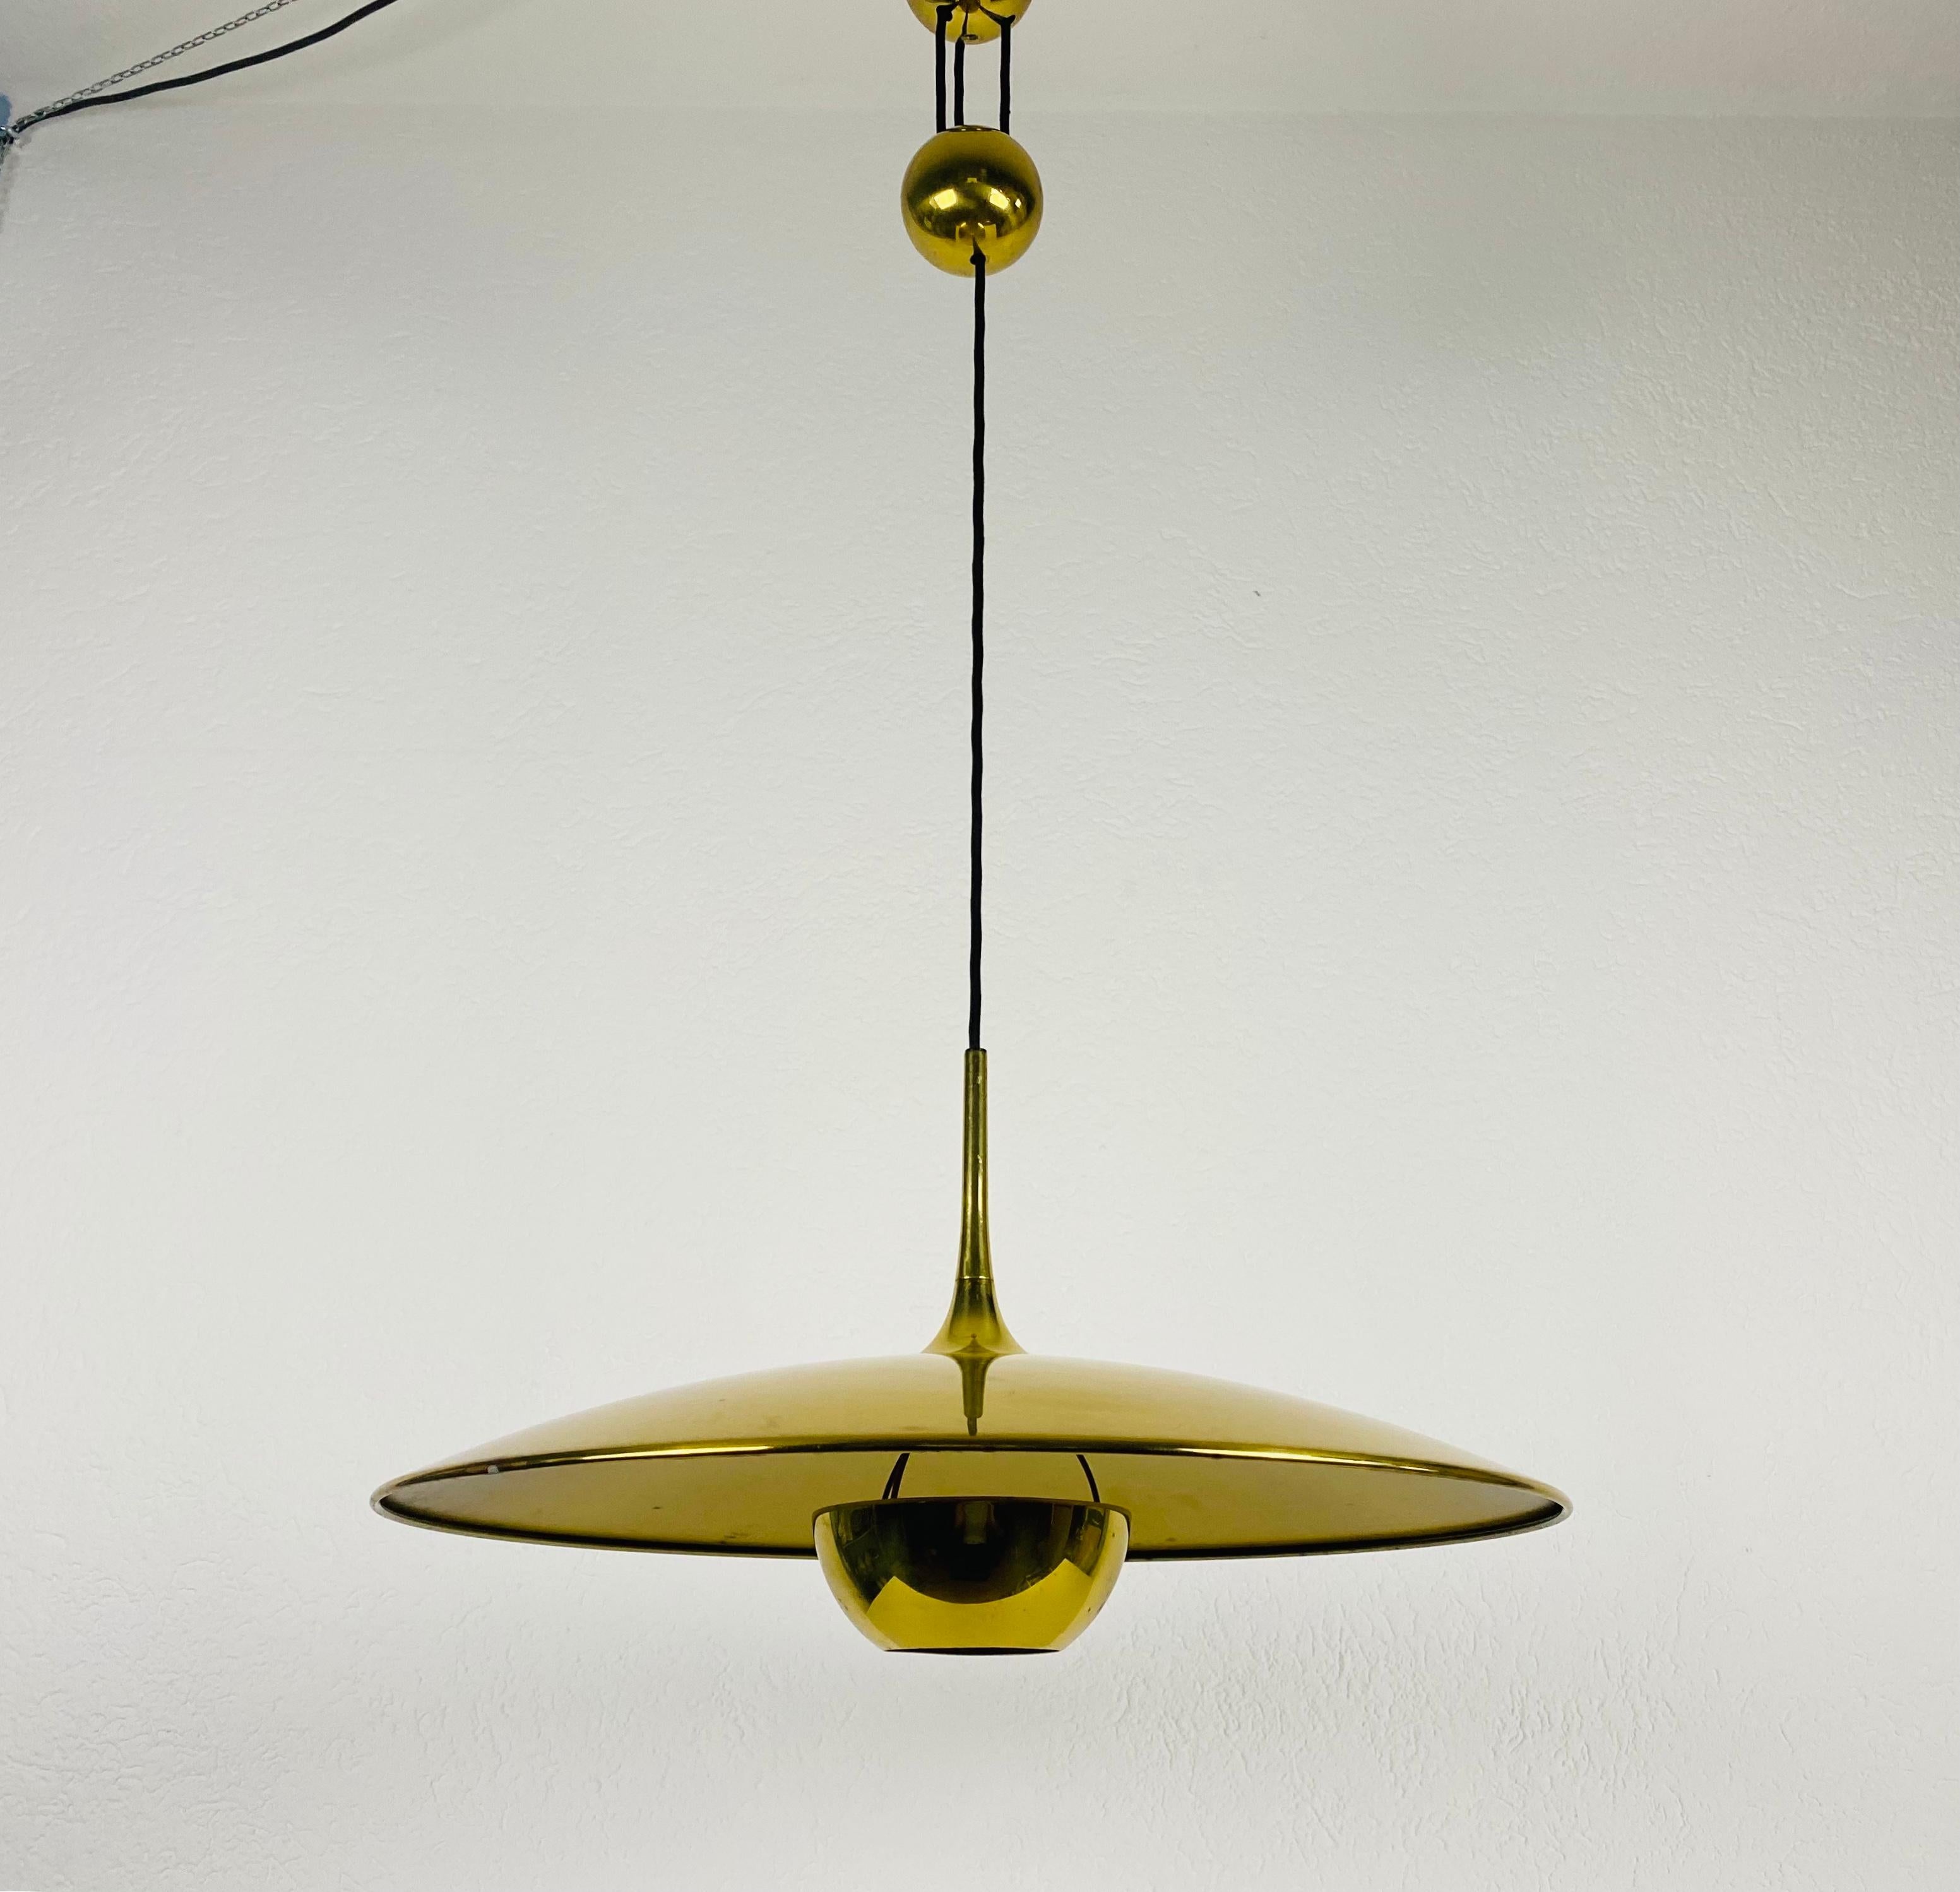 Mid-Century Modern 'Onos 55' Brass Pendant Lamp with Counterweight by Florian Schulz, 1970s Germany